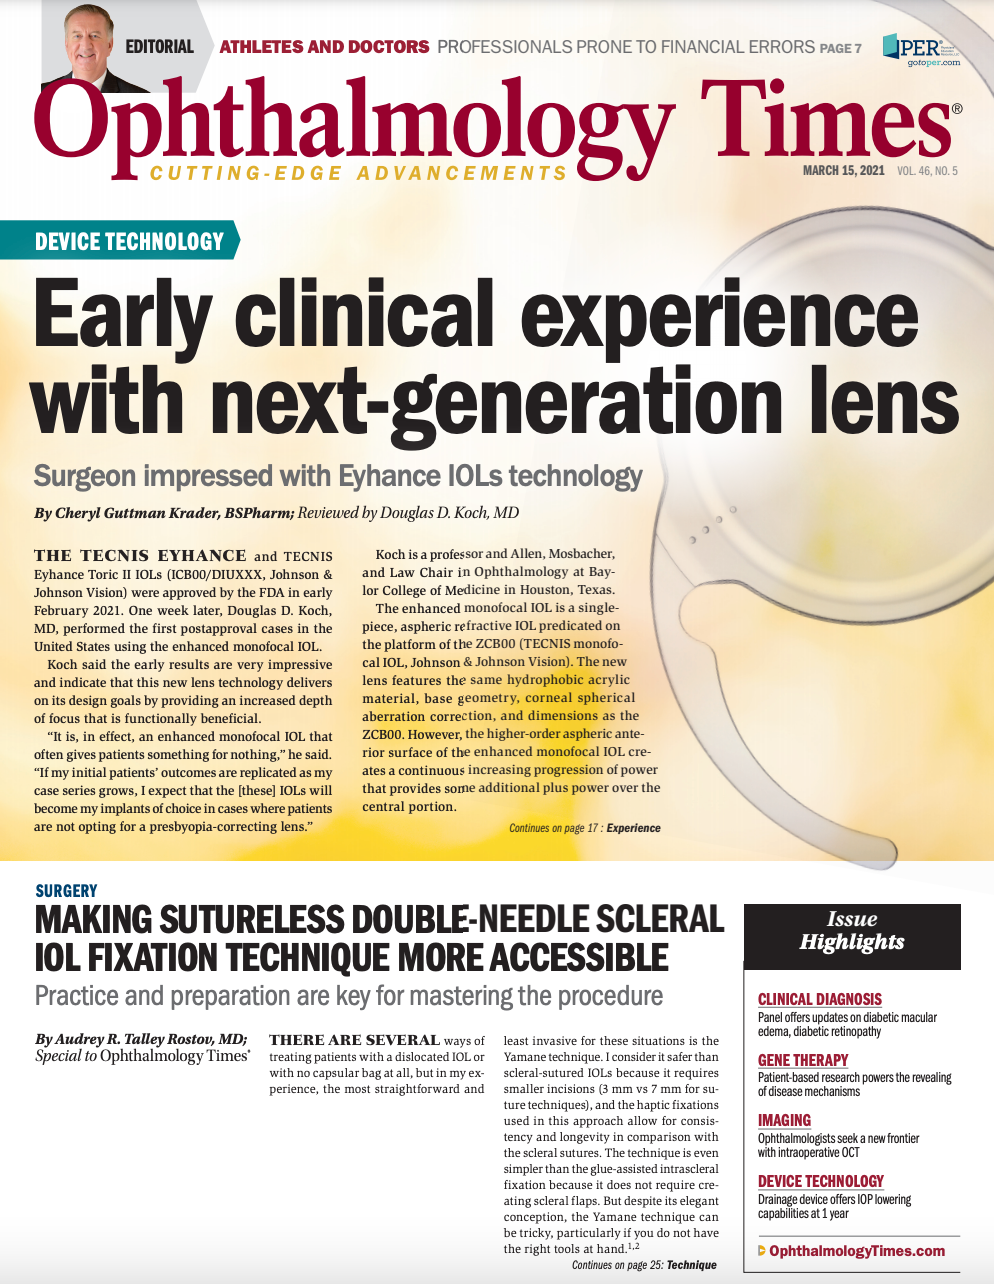 Ophthalmology Times: March 15, 2021